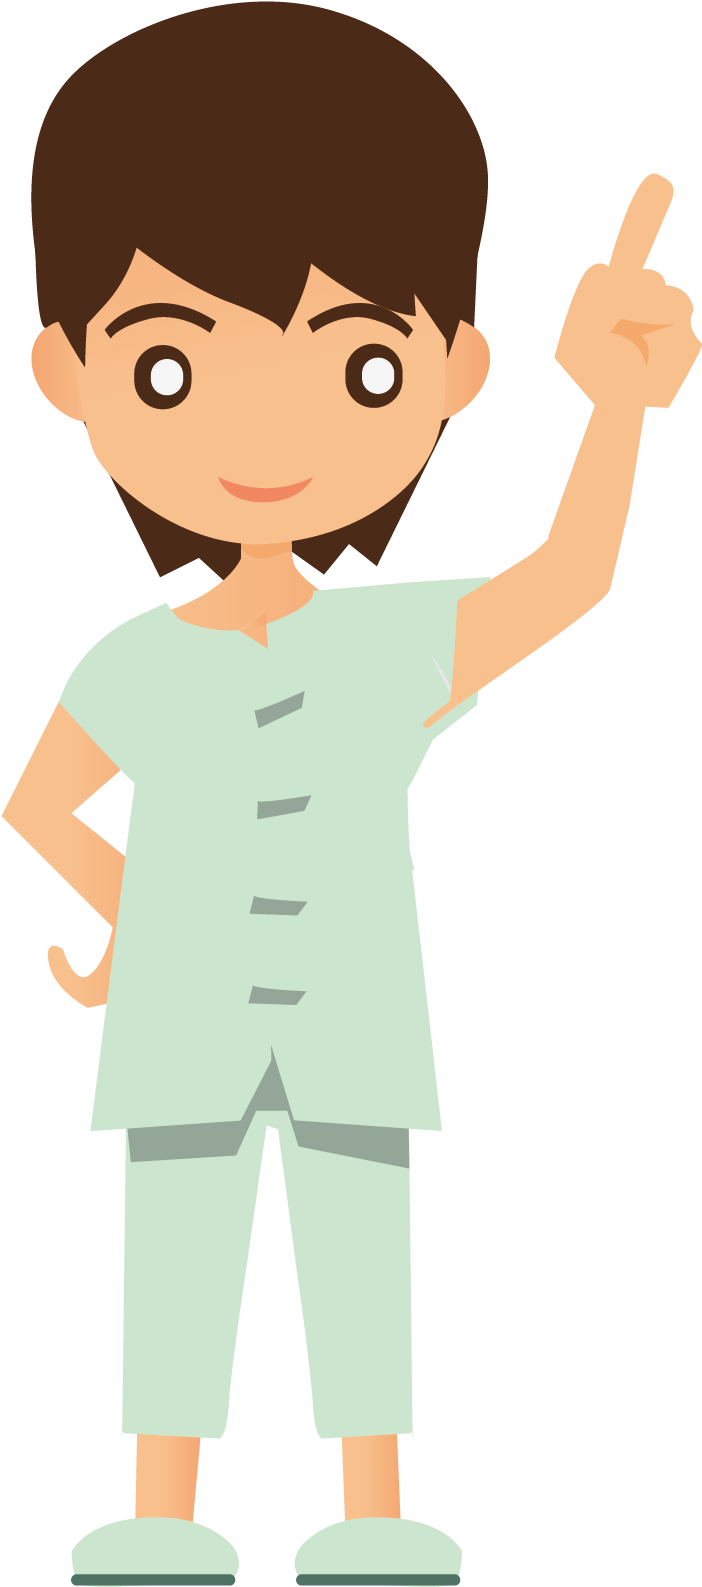 Animated Healthcare Professional Illustration.png PNG